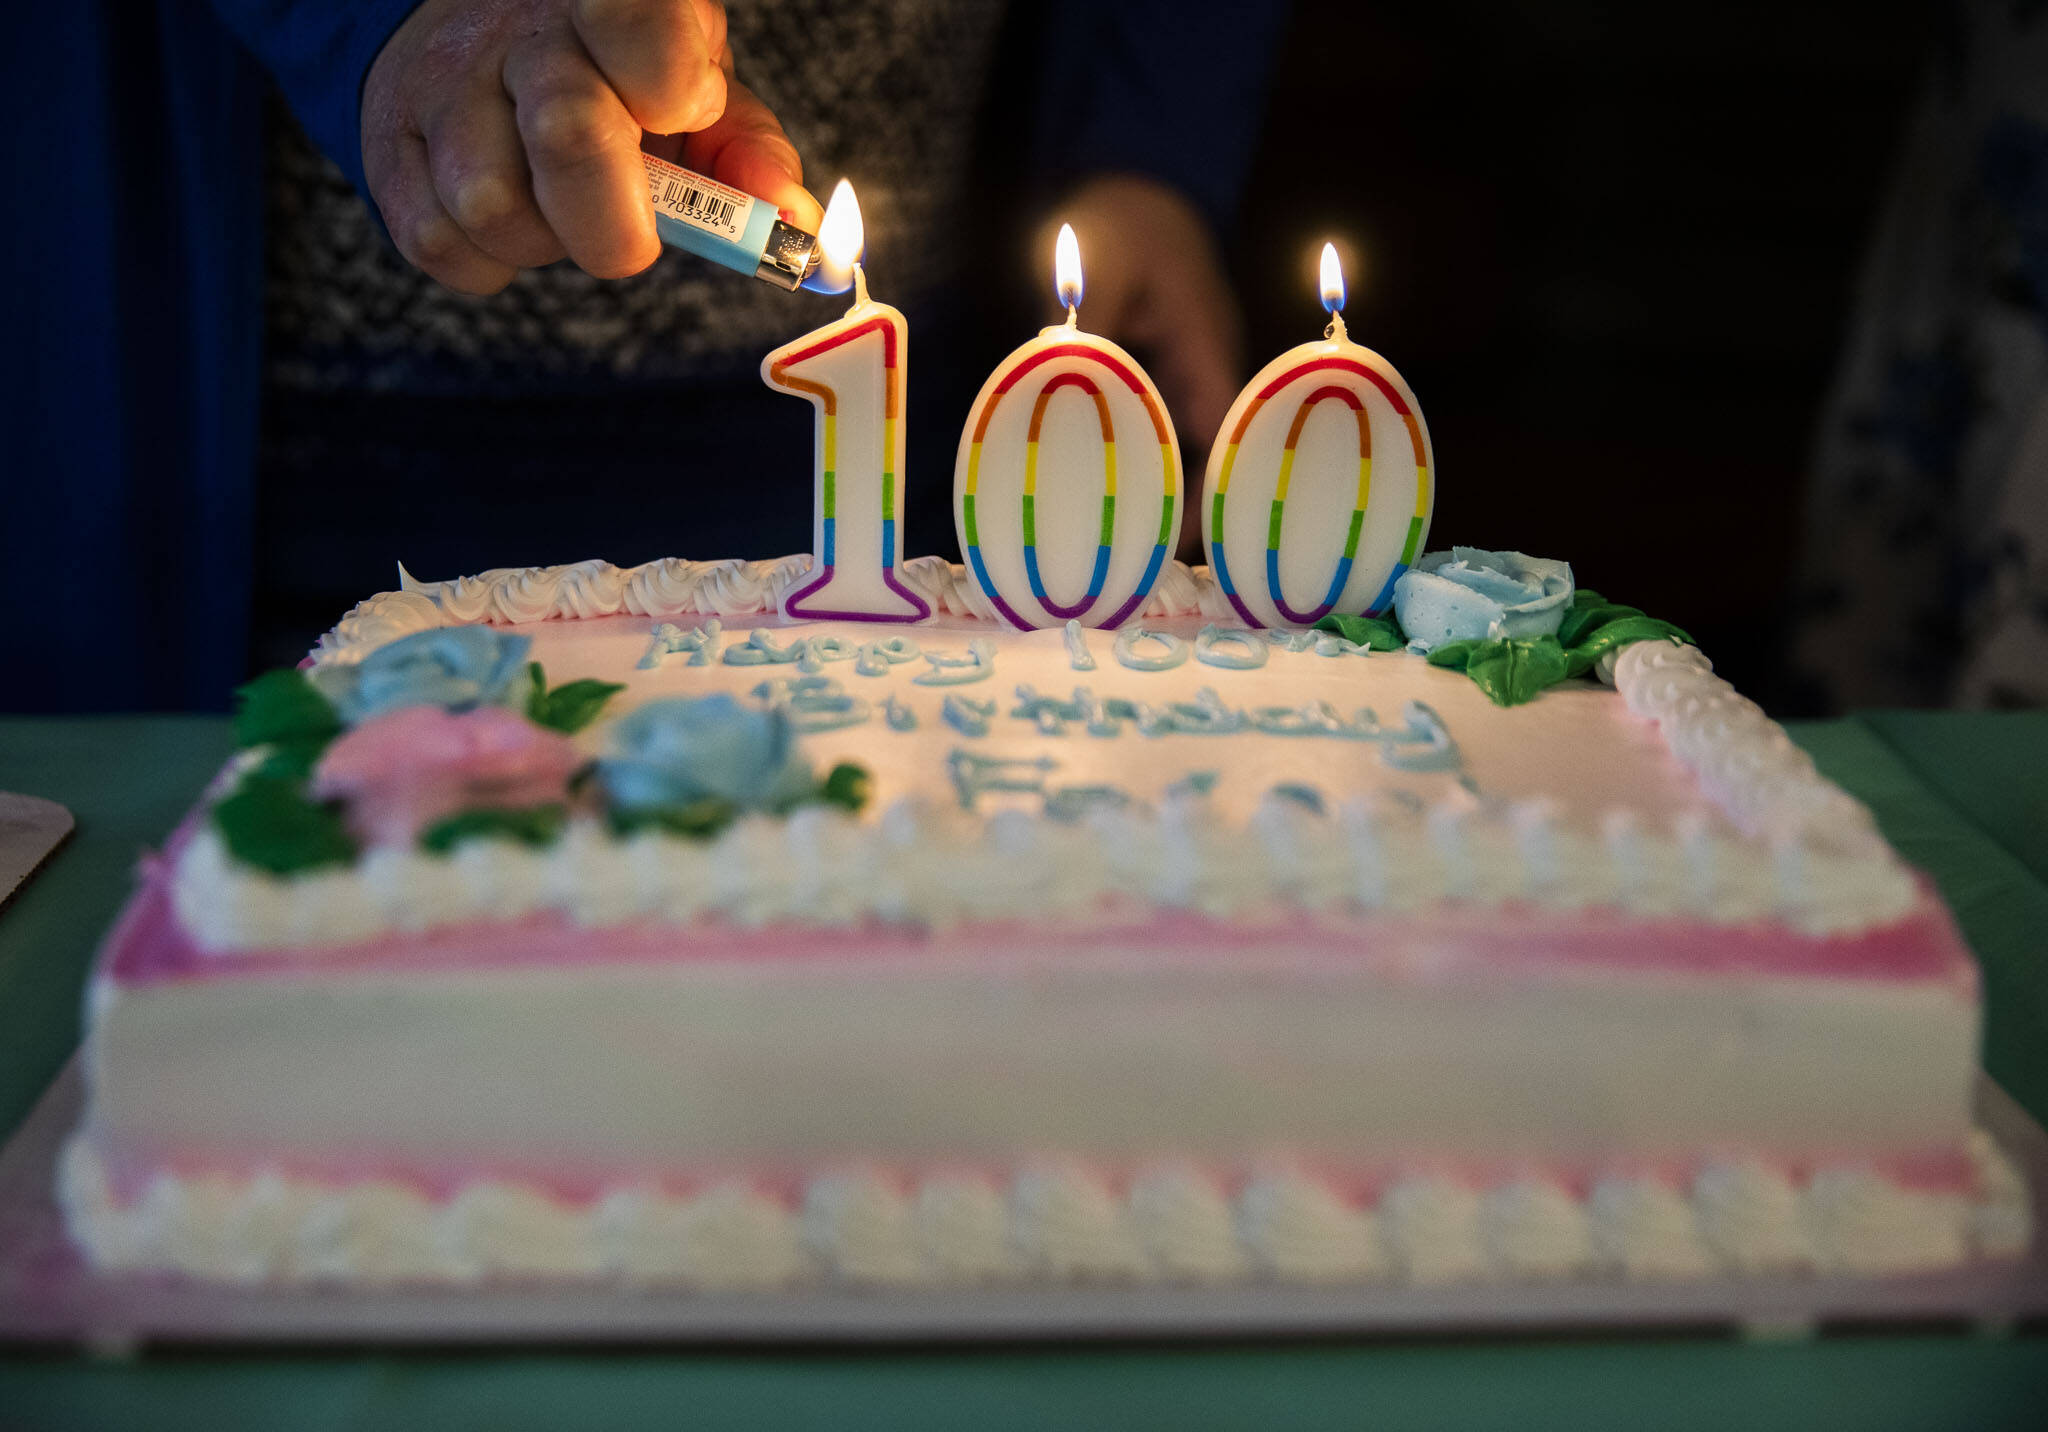 Ferne Ullestad tured 100 on April 6, and her many friends and family gathered to honor her Saturday at the Marysville Historical Society. (Olivia Vanni / The Herald)